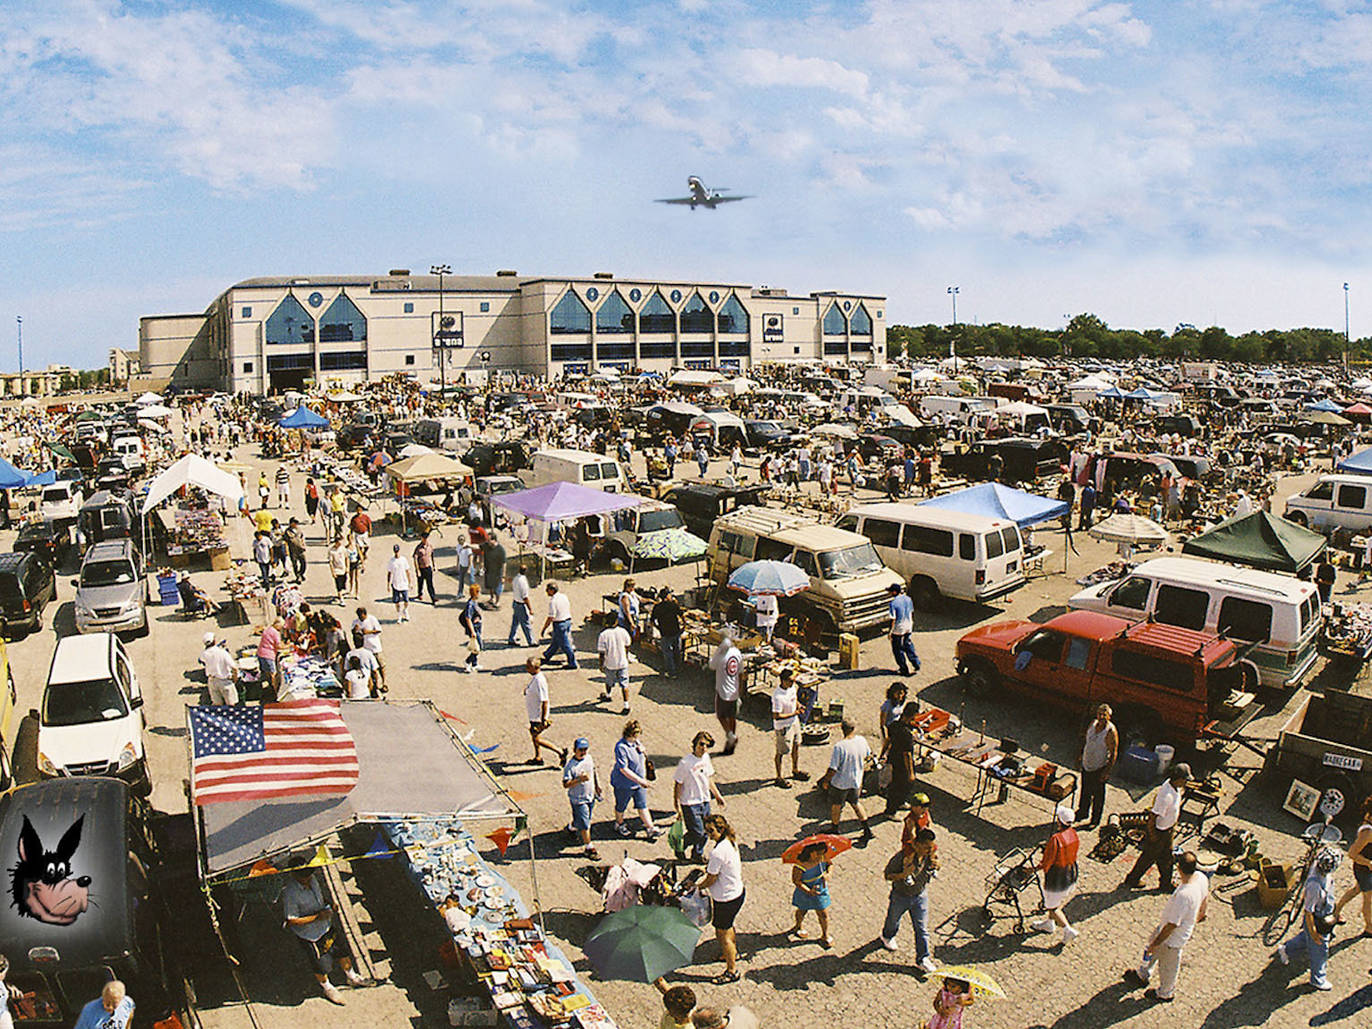 The best flea markets in and around Chicago for great deals